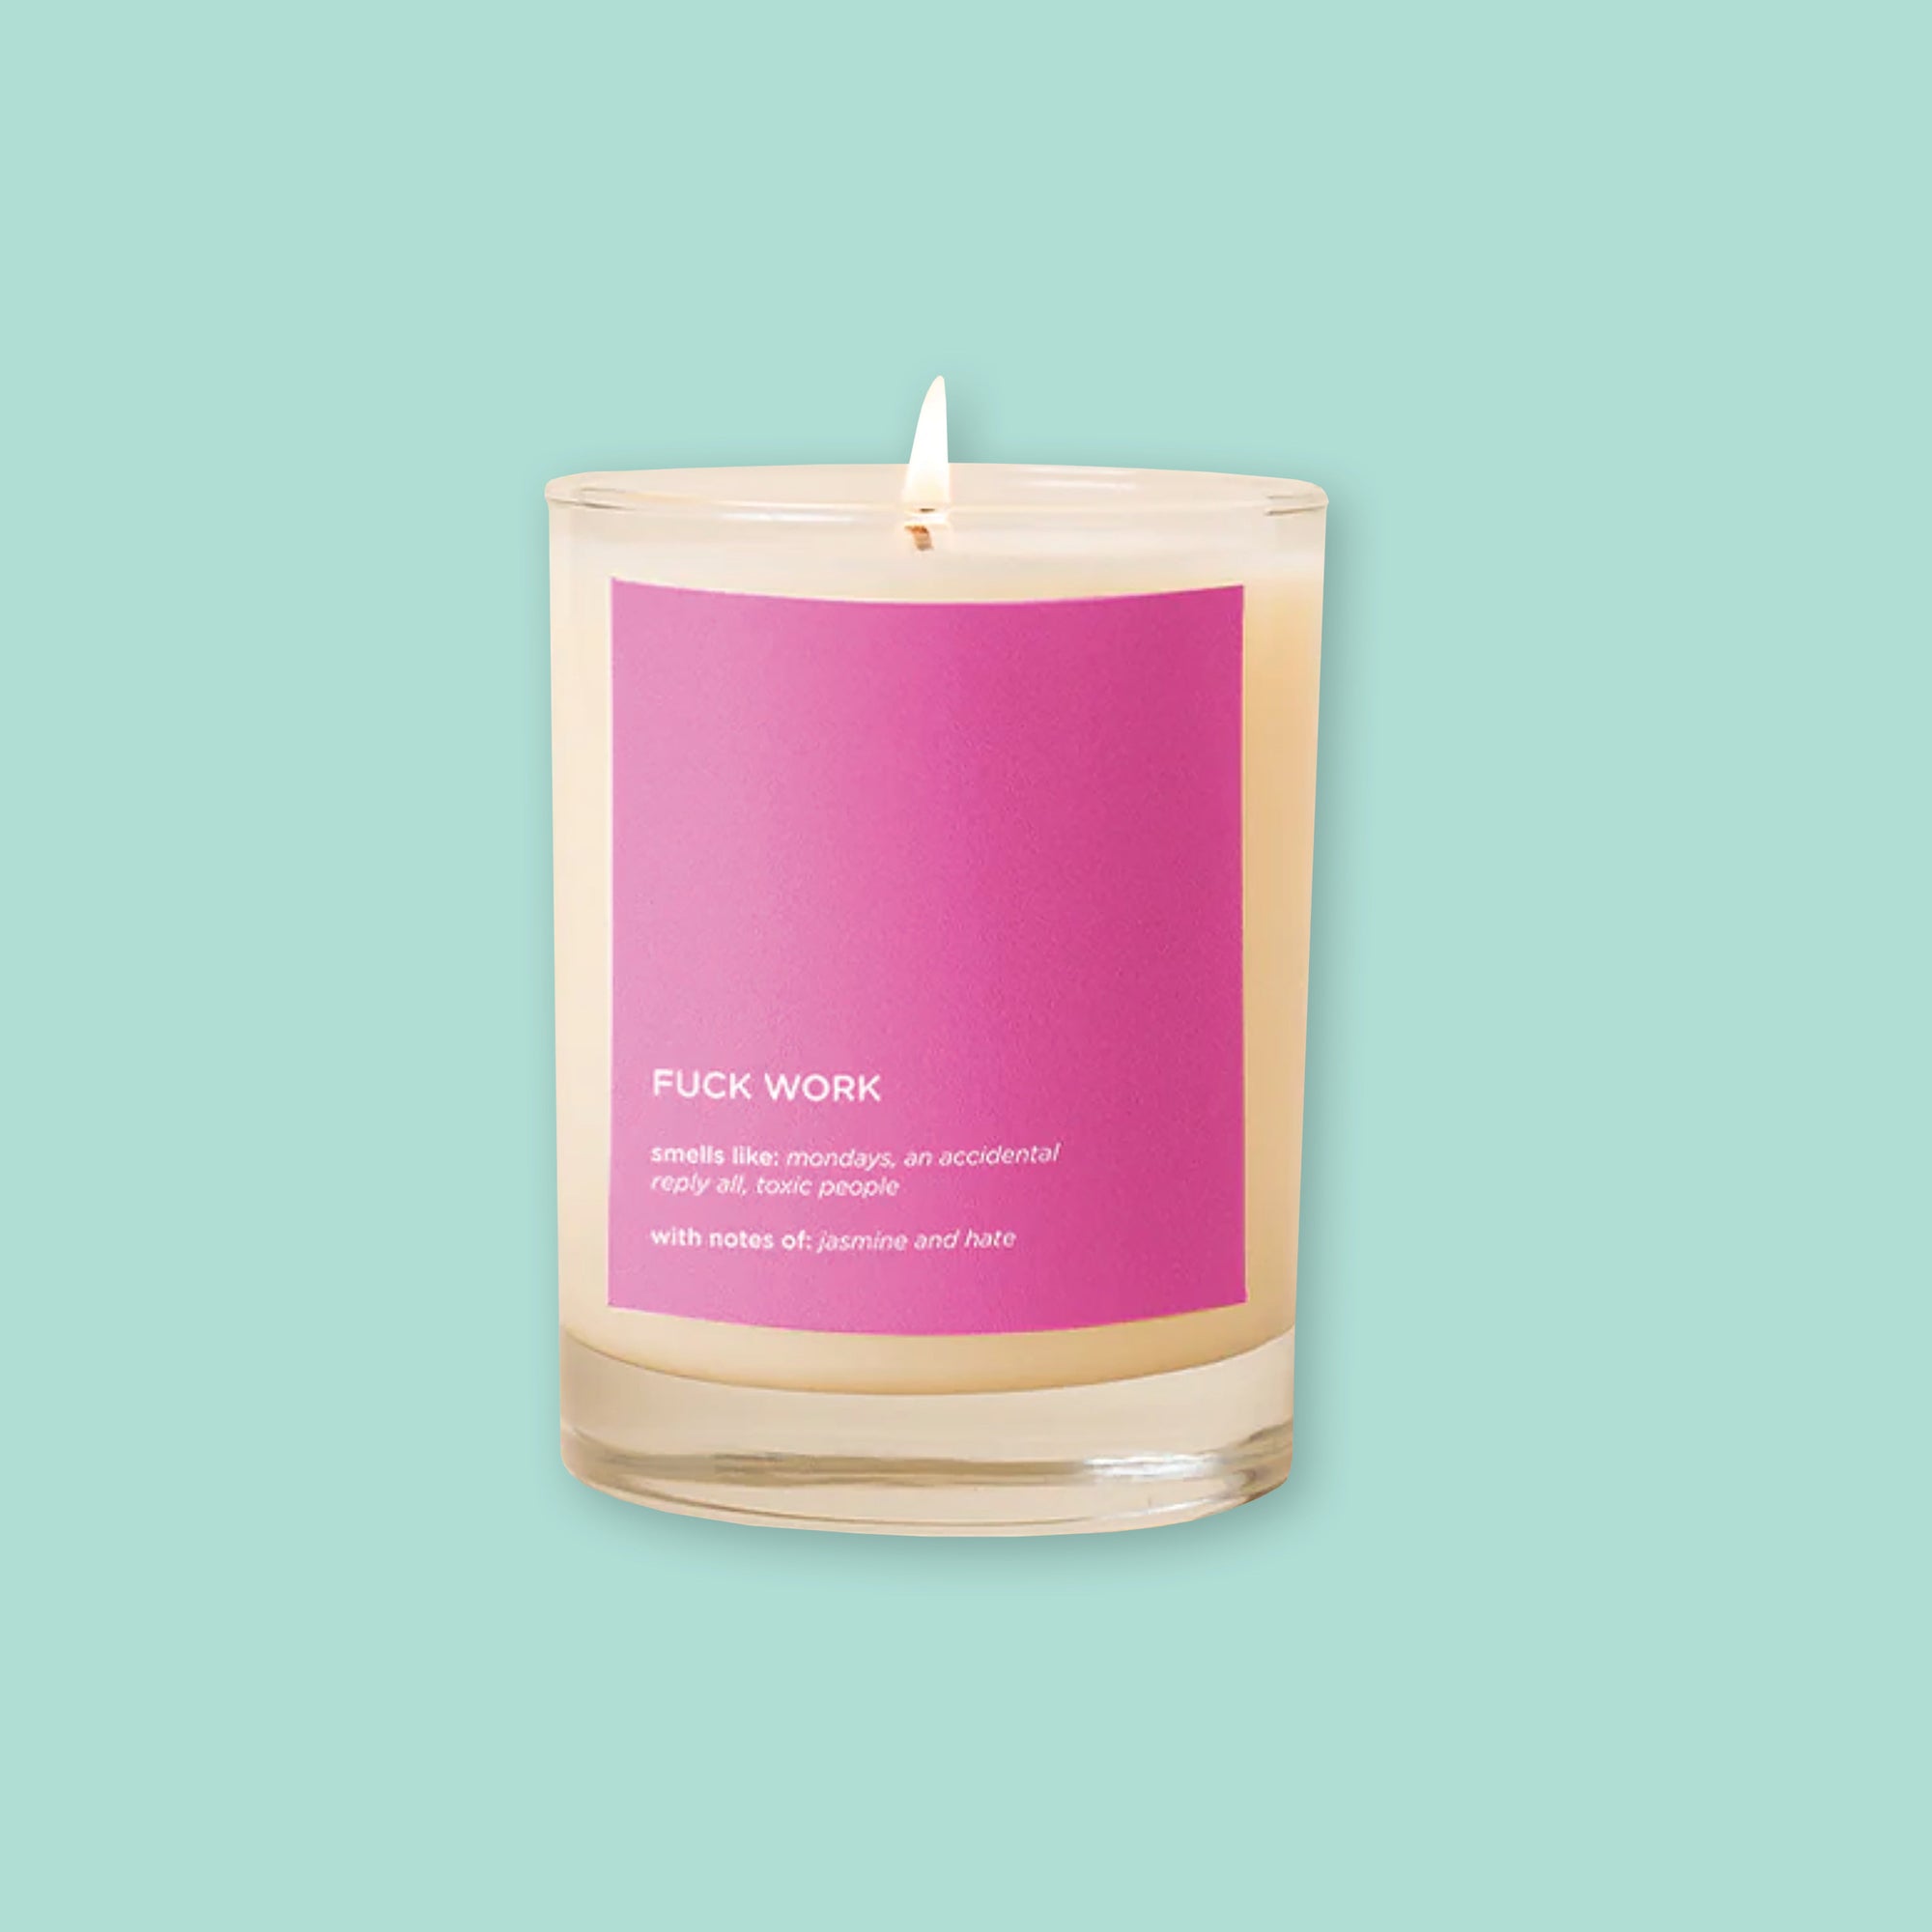 On a mint green background sits a candle. The picture is a close-up of a glass candle that is lit and has a hot pink label on the front. It says "FUCK WORK," "smells like: mondays, an accidental reply all, toxic people," "with notes of: jasmine and hate." It is in a white, block font."